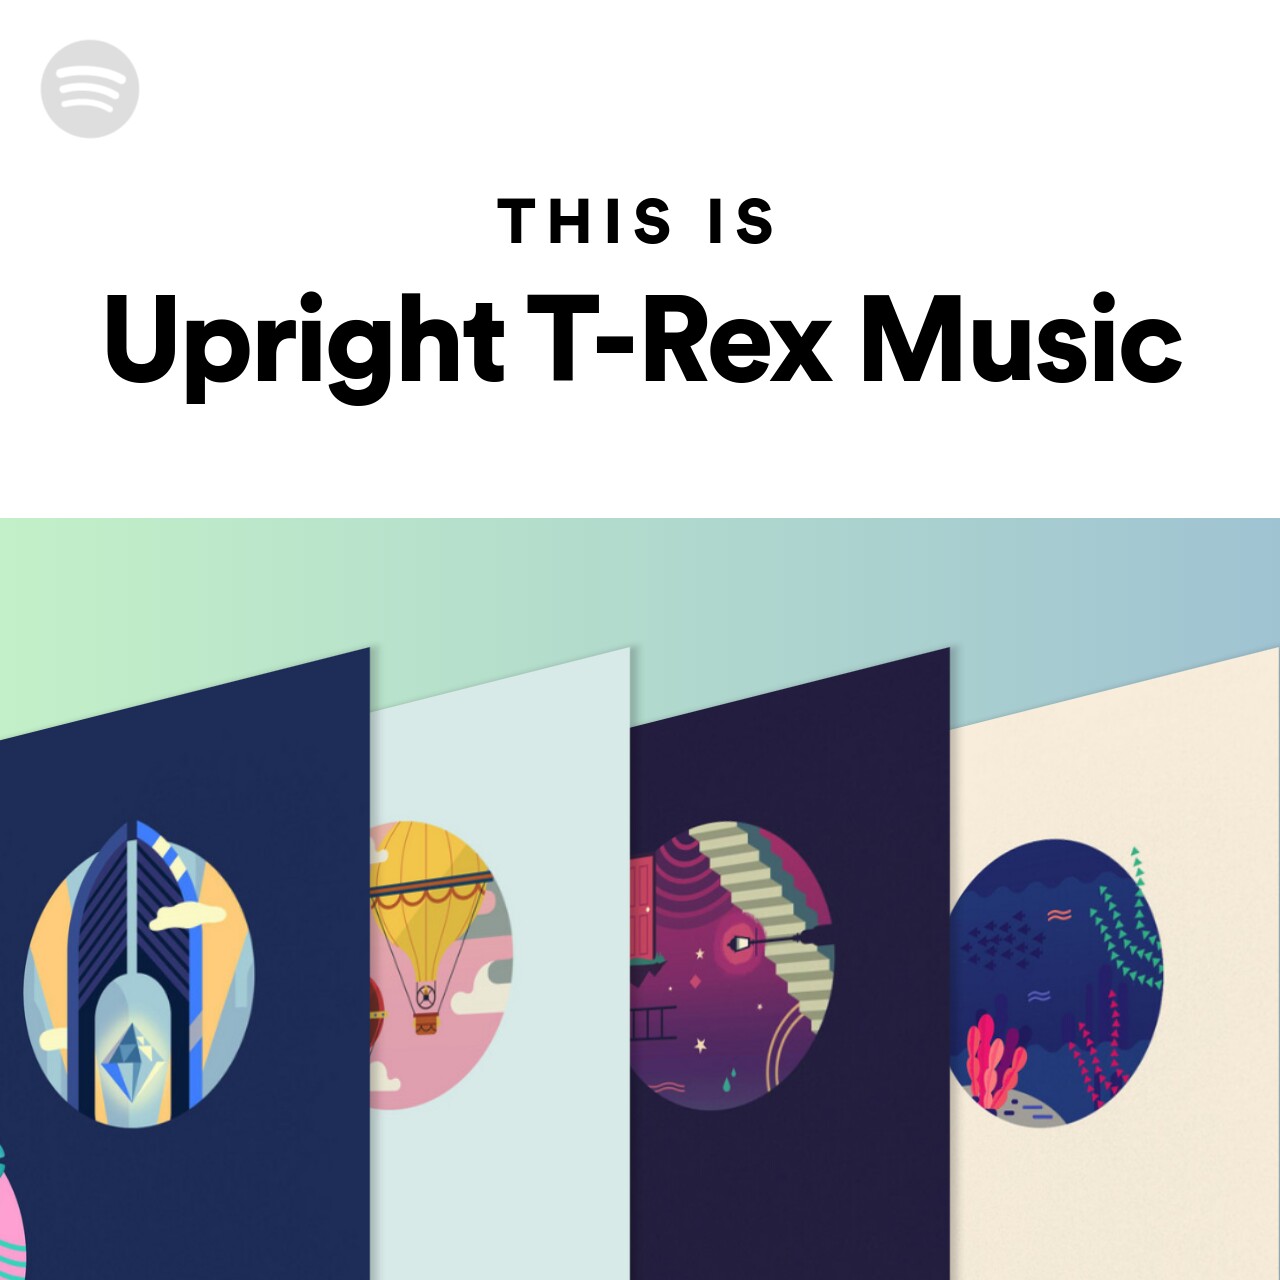 This Is Upright T-Rex Music